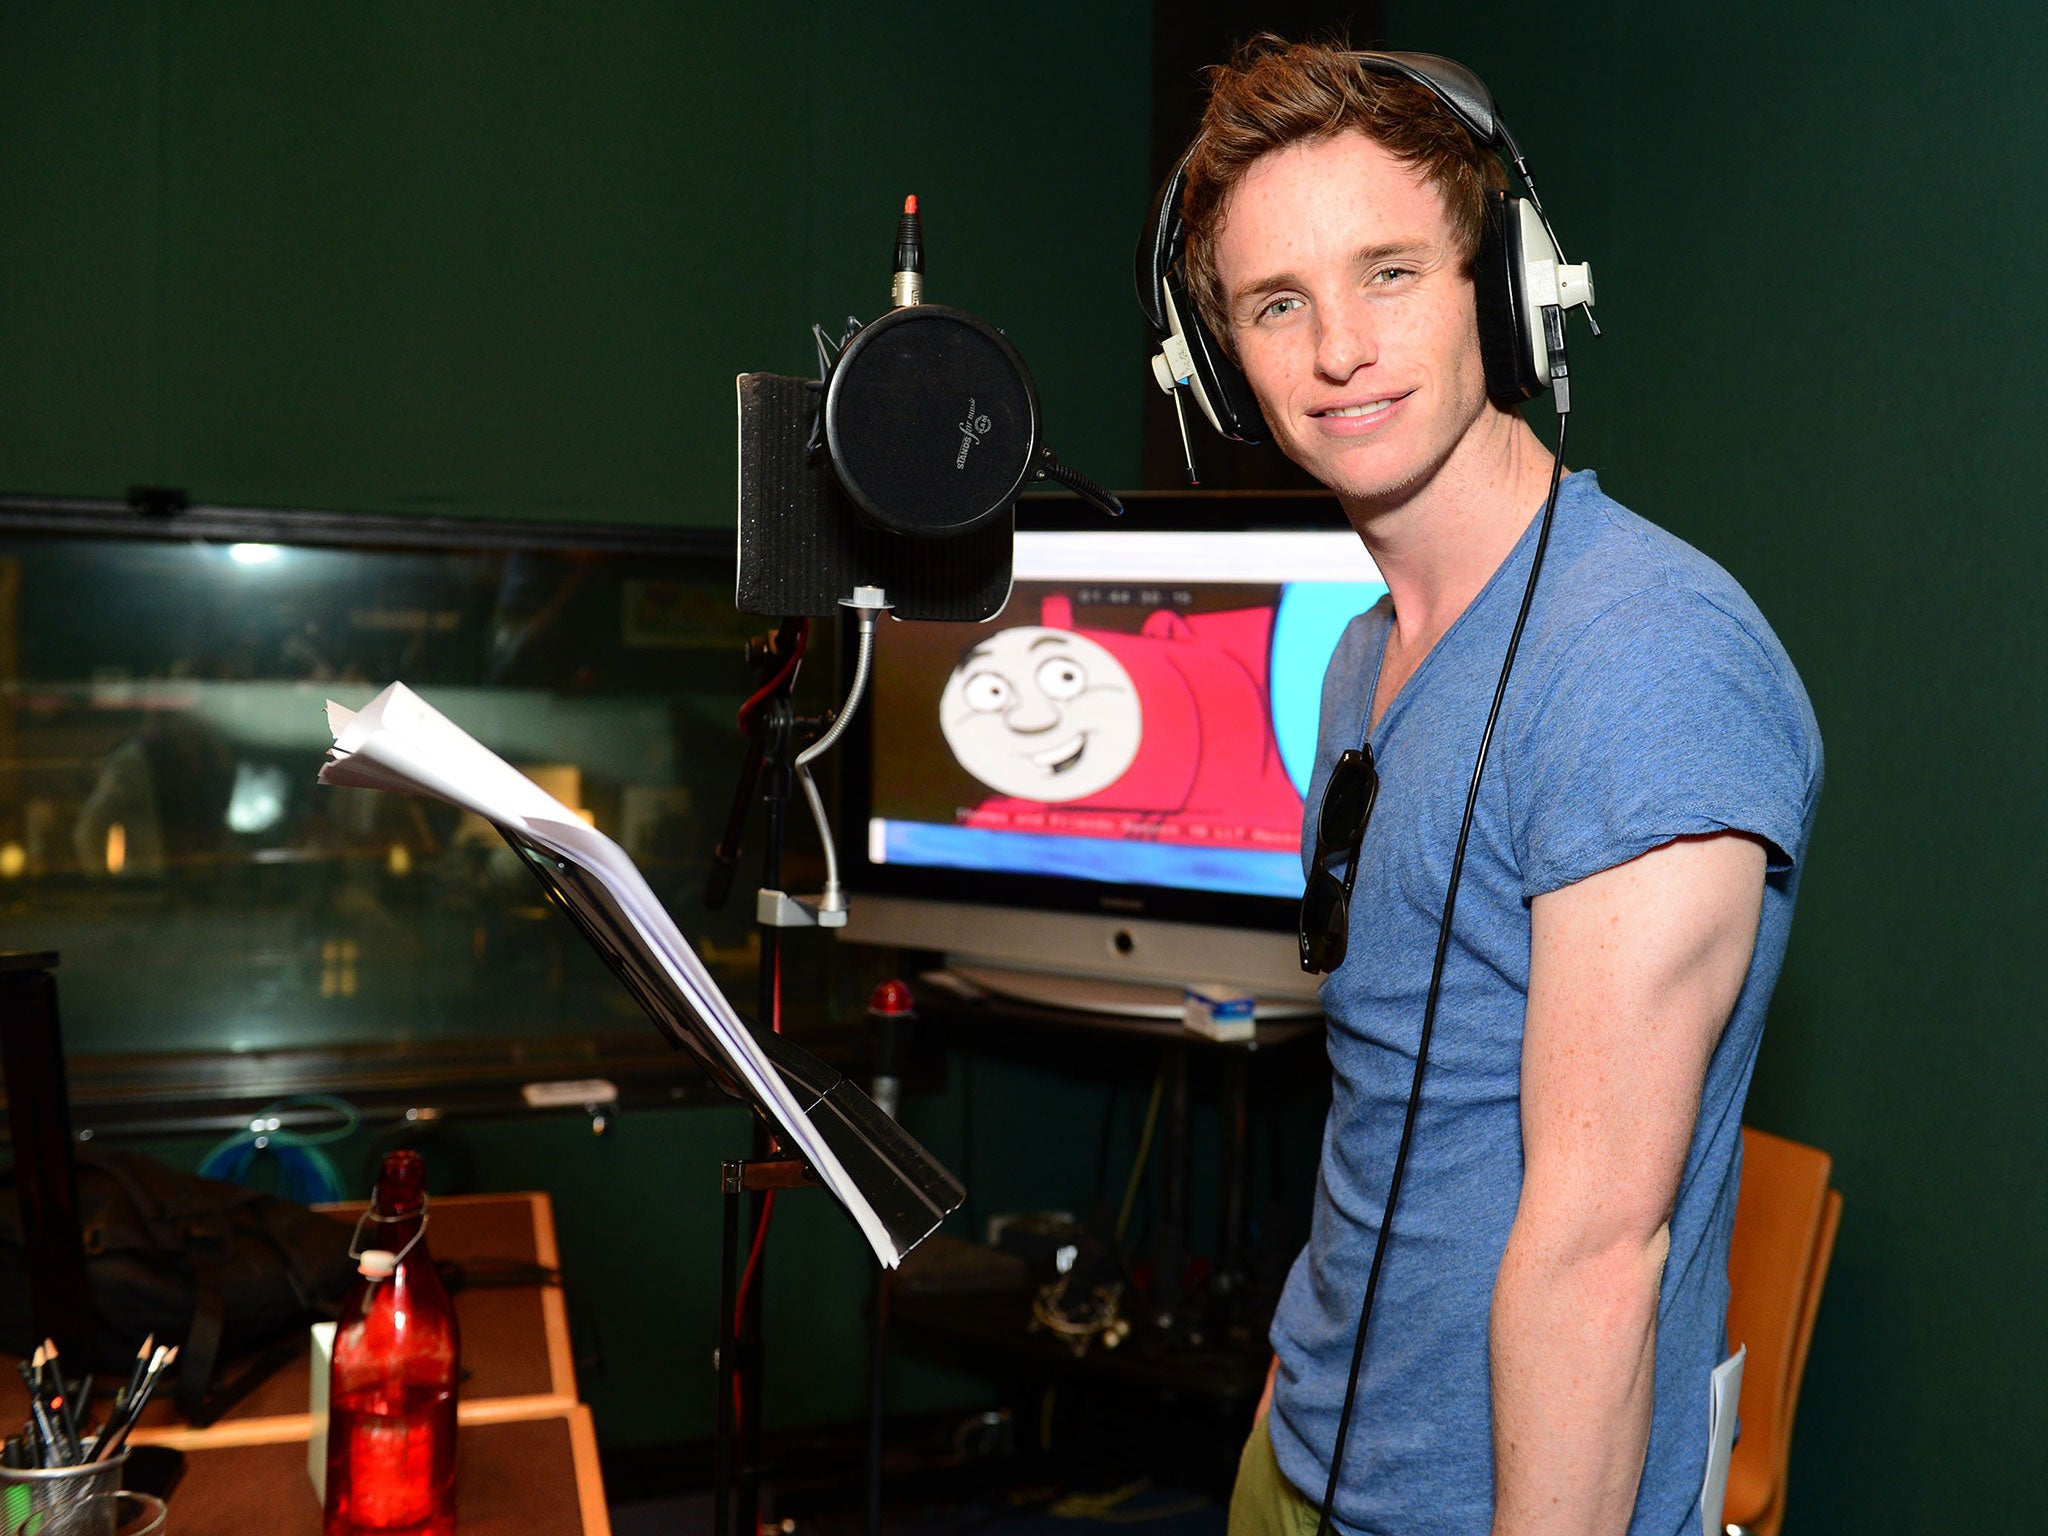 Eddie Redmayne in the recording studio to voice the character of Ryan in the new Thomas the Tank Engine film